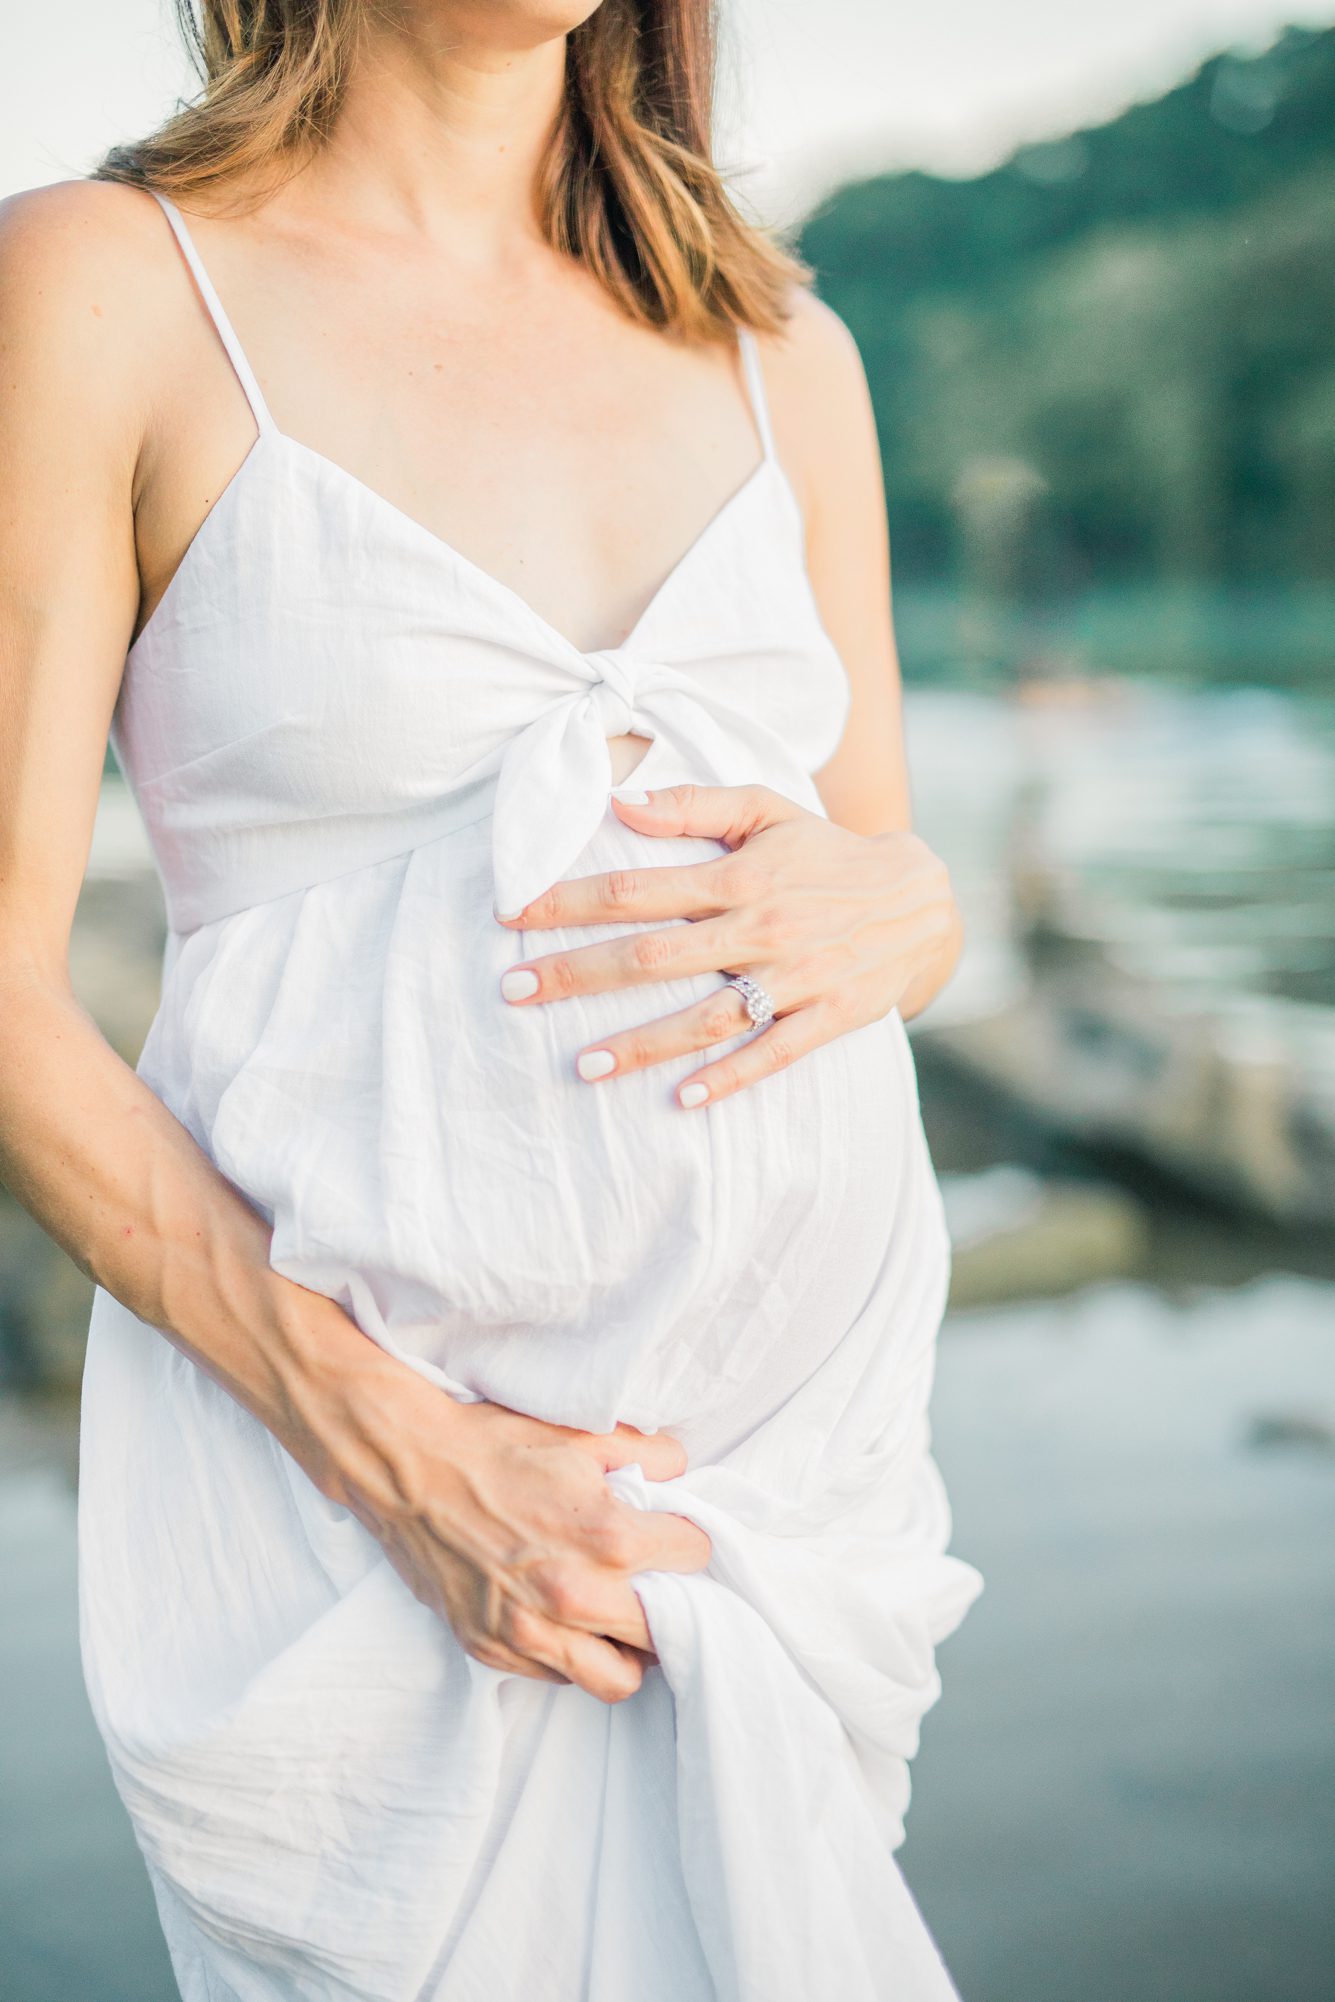 Cropped image of mom holding dress and resting hand on baby bump by Potomac River. Photo by Washington DC maternity photographer, LRG Portraits.